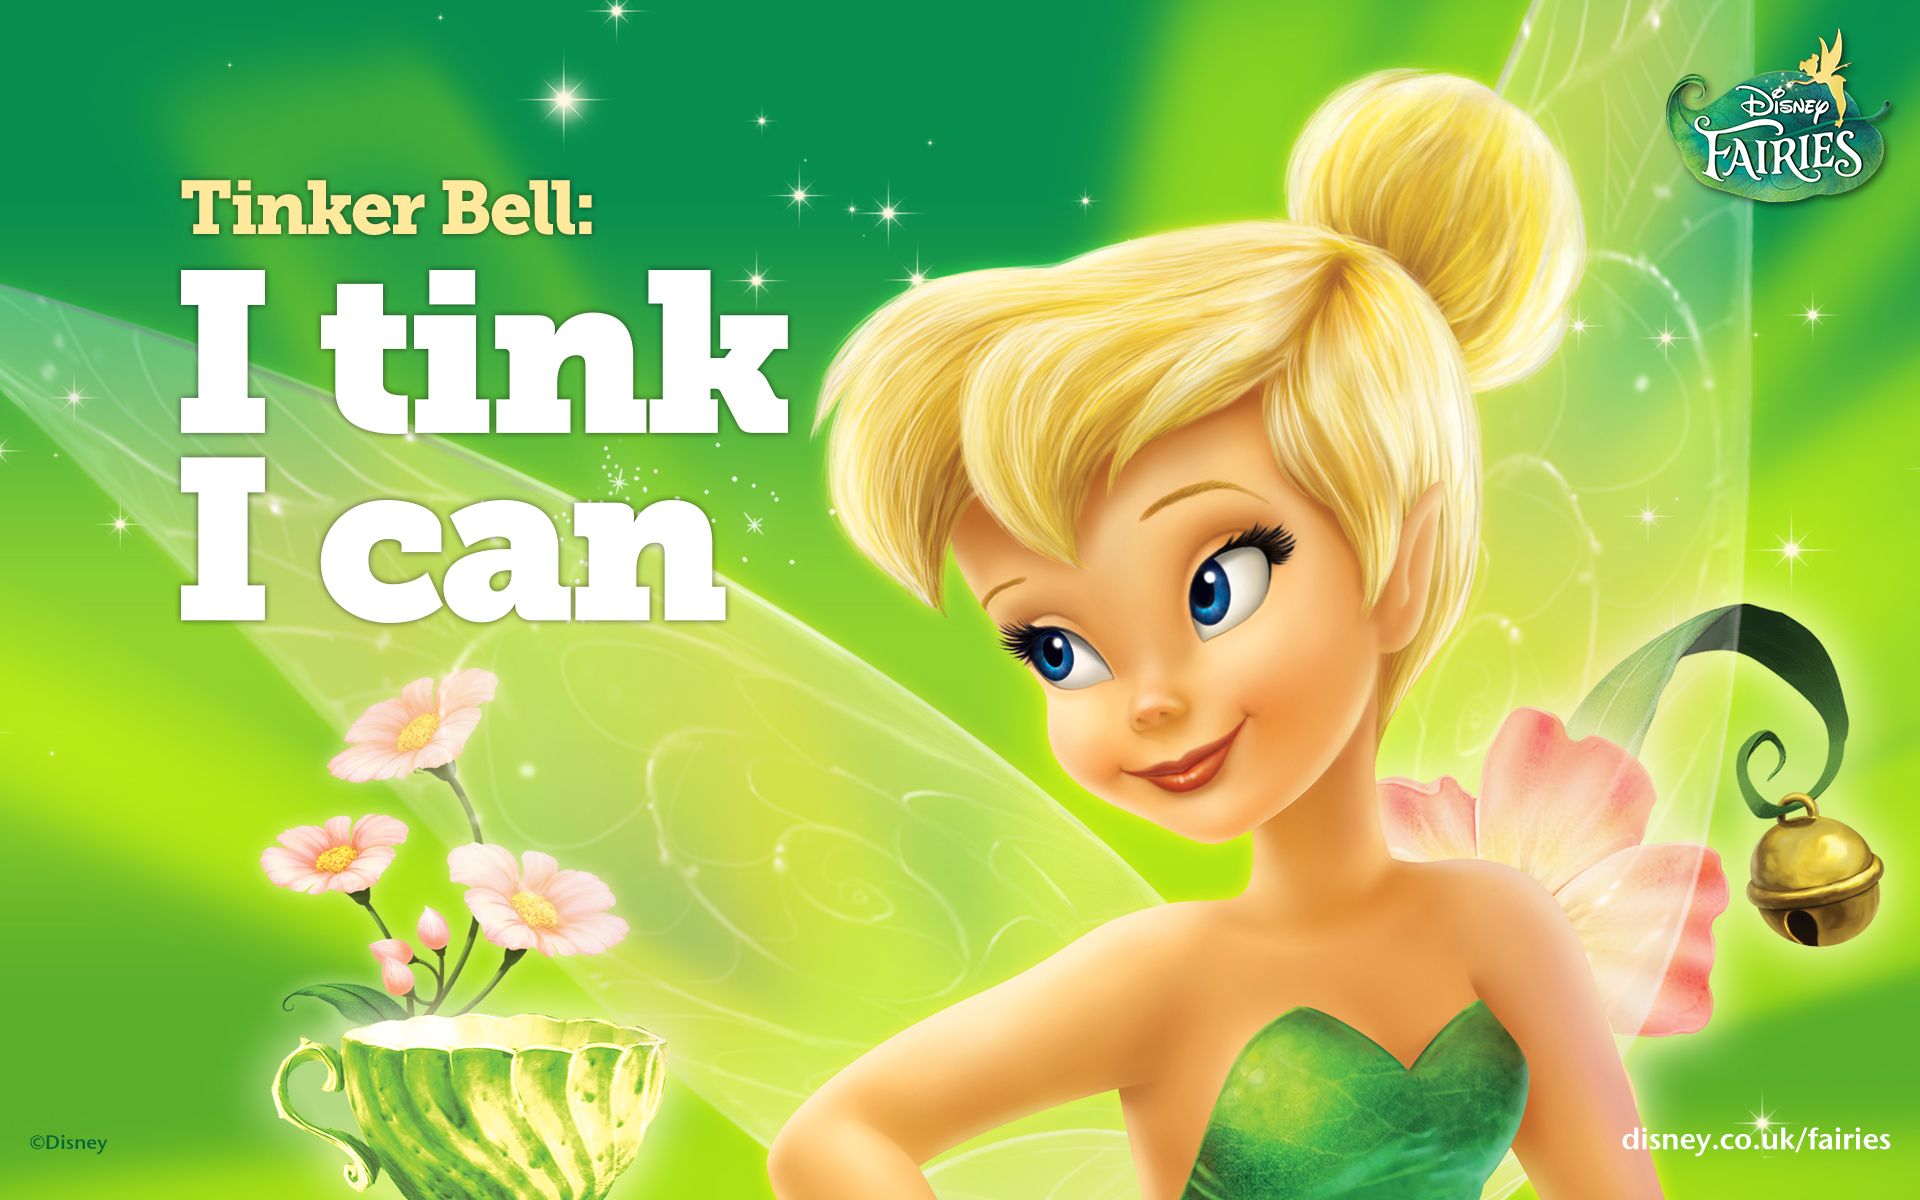 Tinker Bell Page - Wallpapers | Fairies UK